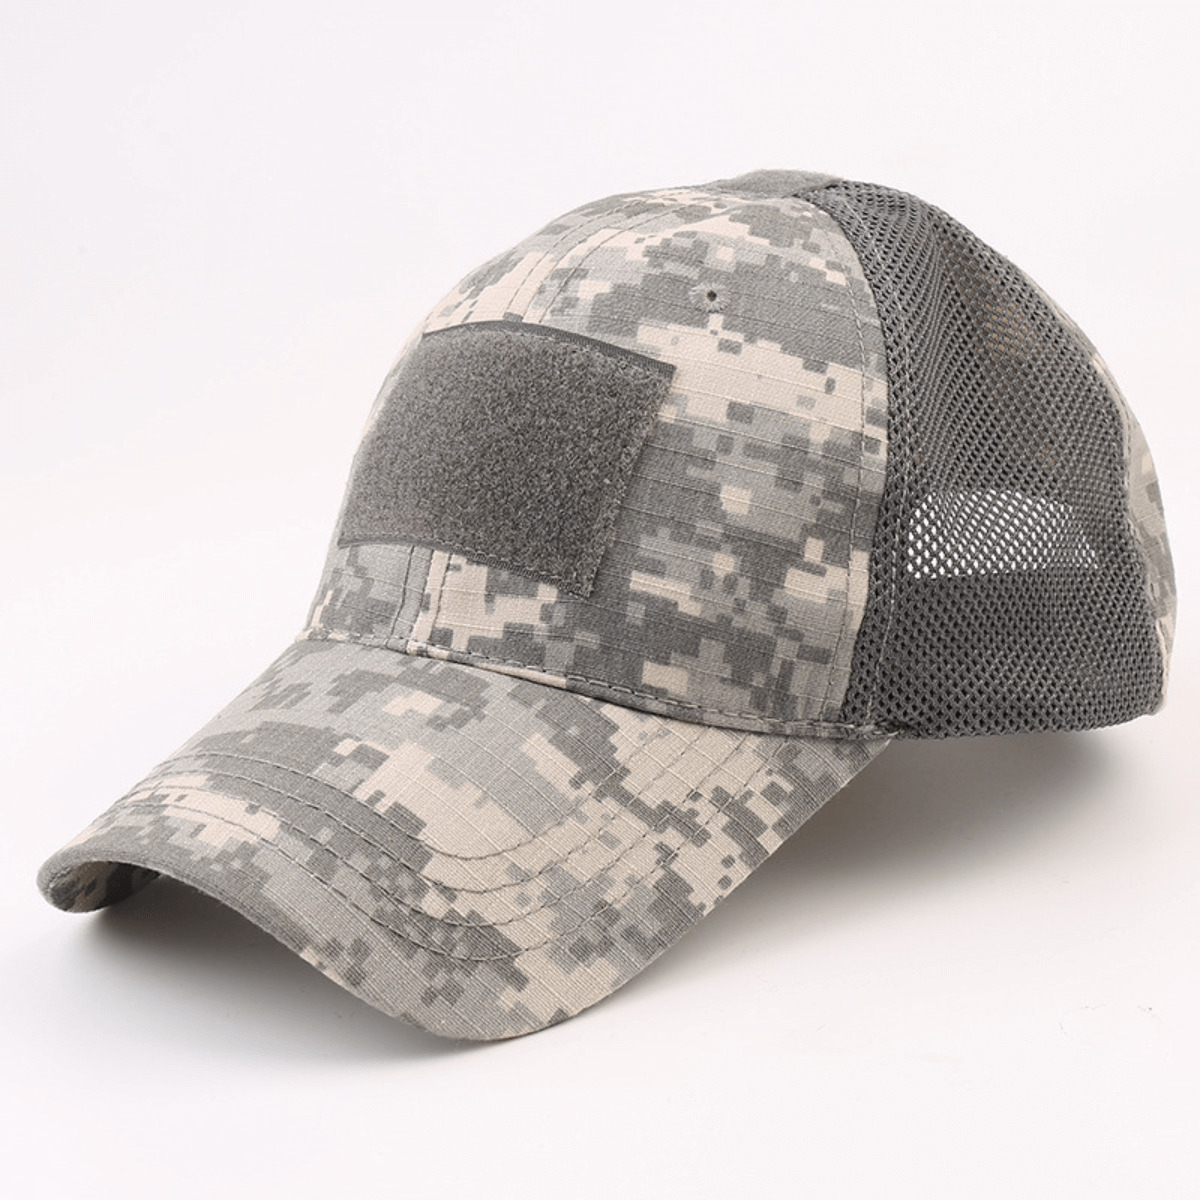 Tactical-Style Patch Hat With Adjustable Strap - Green